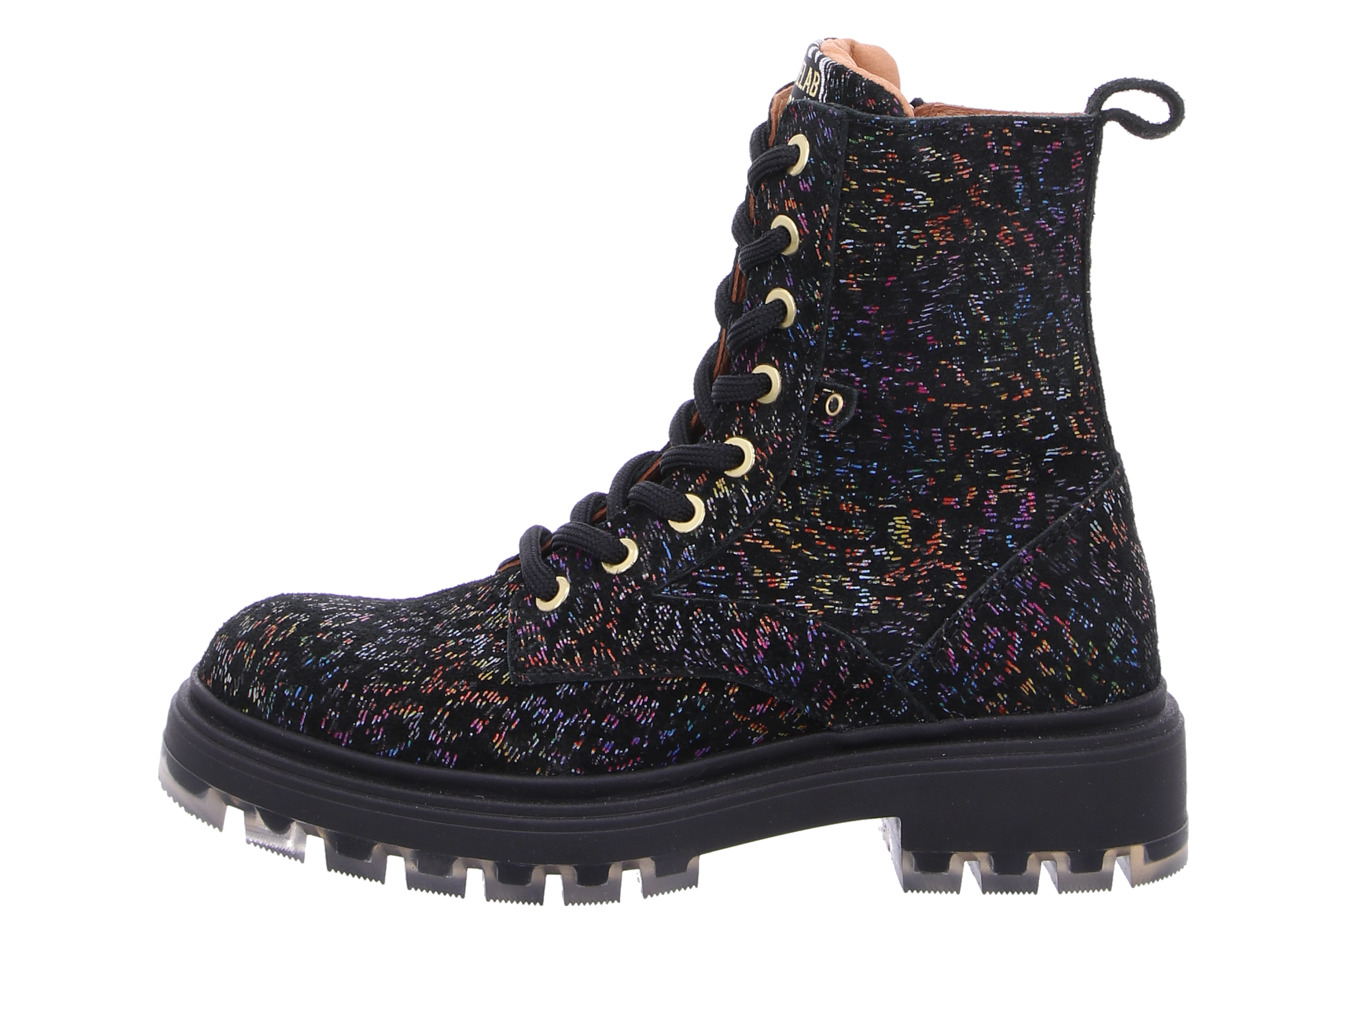 develab_girls_mid_boot_laces_41444_929_3263